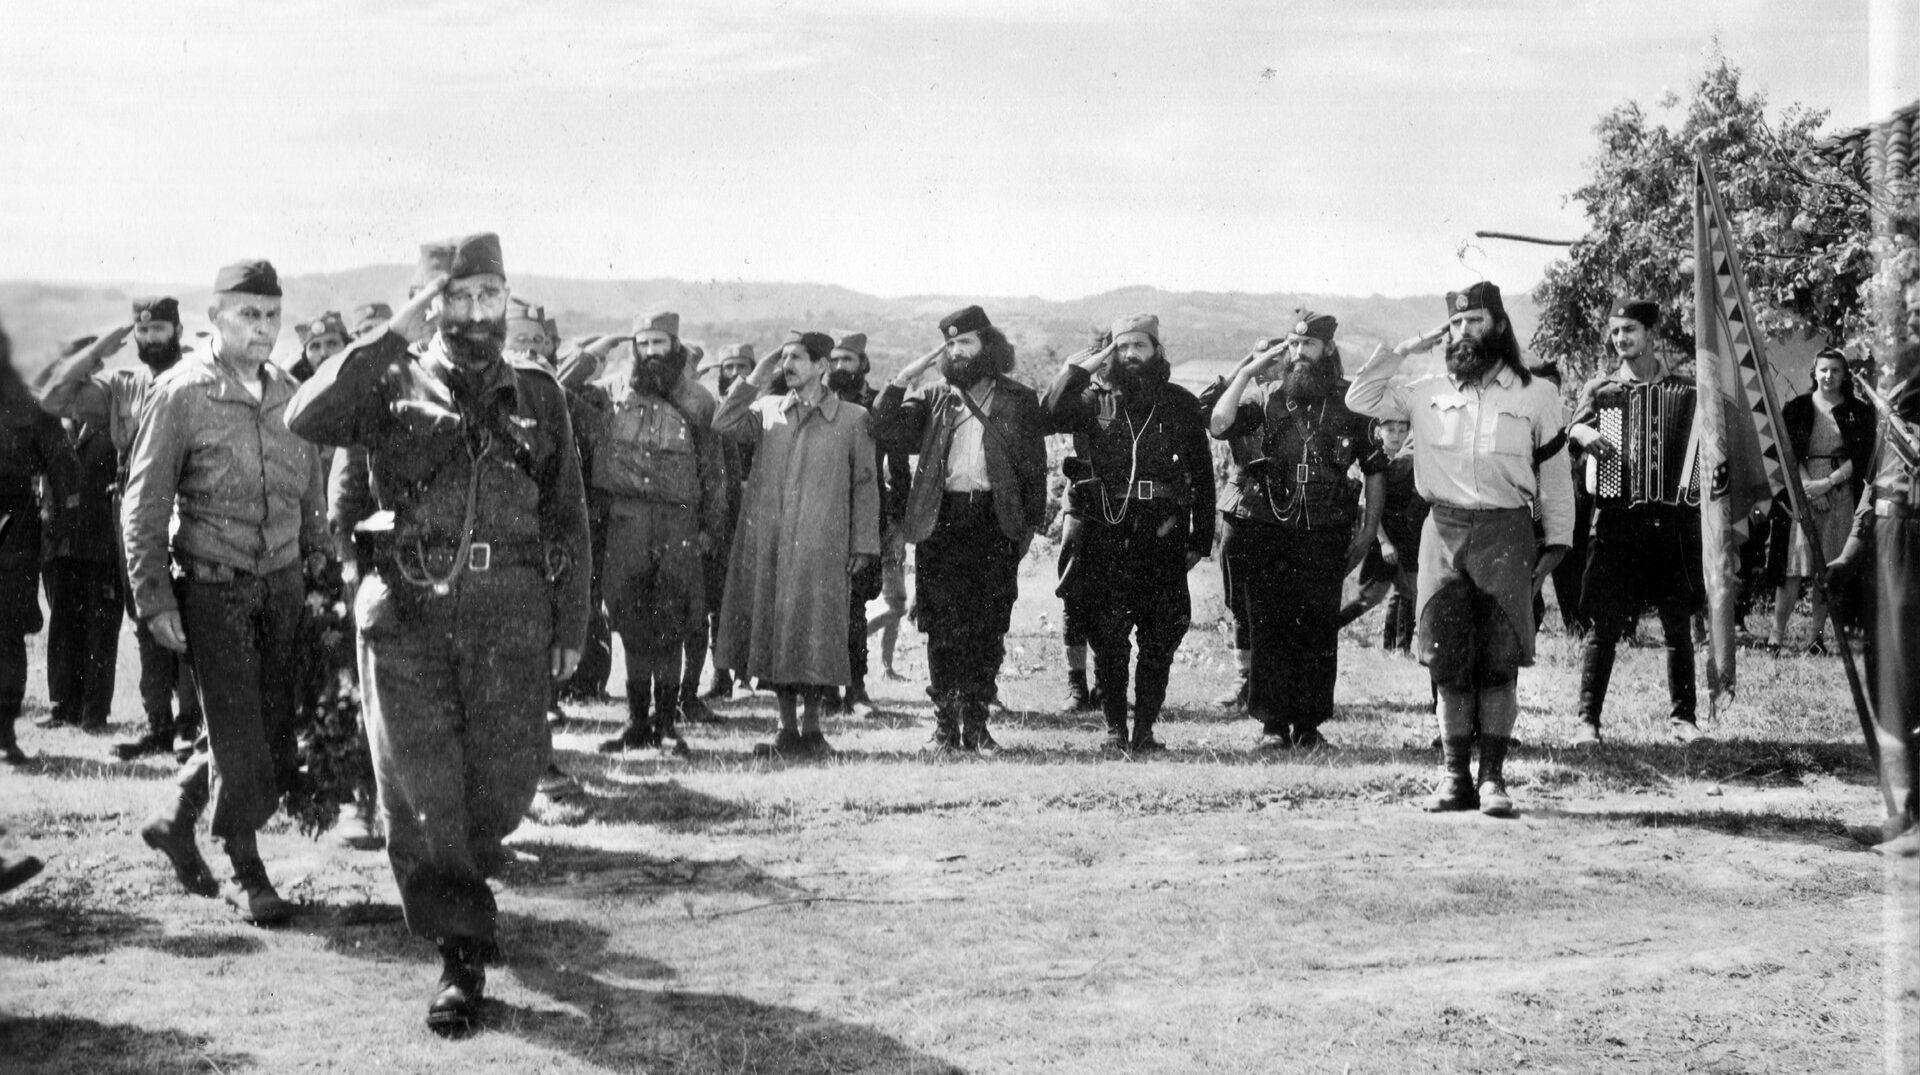 General Drazha Mihailovich, leader of the Chetniks, inspects a group of his resistance fighters somewhere in Yugoslavia. Accompanying Mihailovich is Colonel Robert McDowell of the American OSS covert operations organization. McDowell and Mihailovich cooperated during Operation Halyard to rescue downed Allied airmen in August-September 1944.